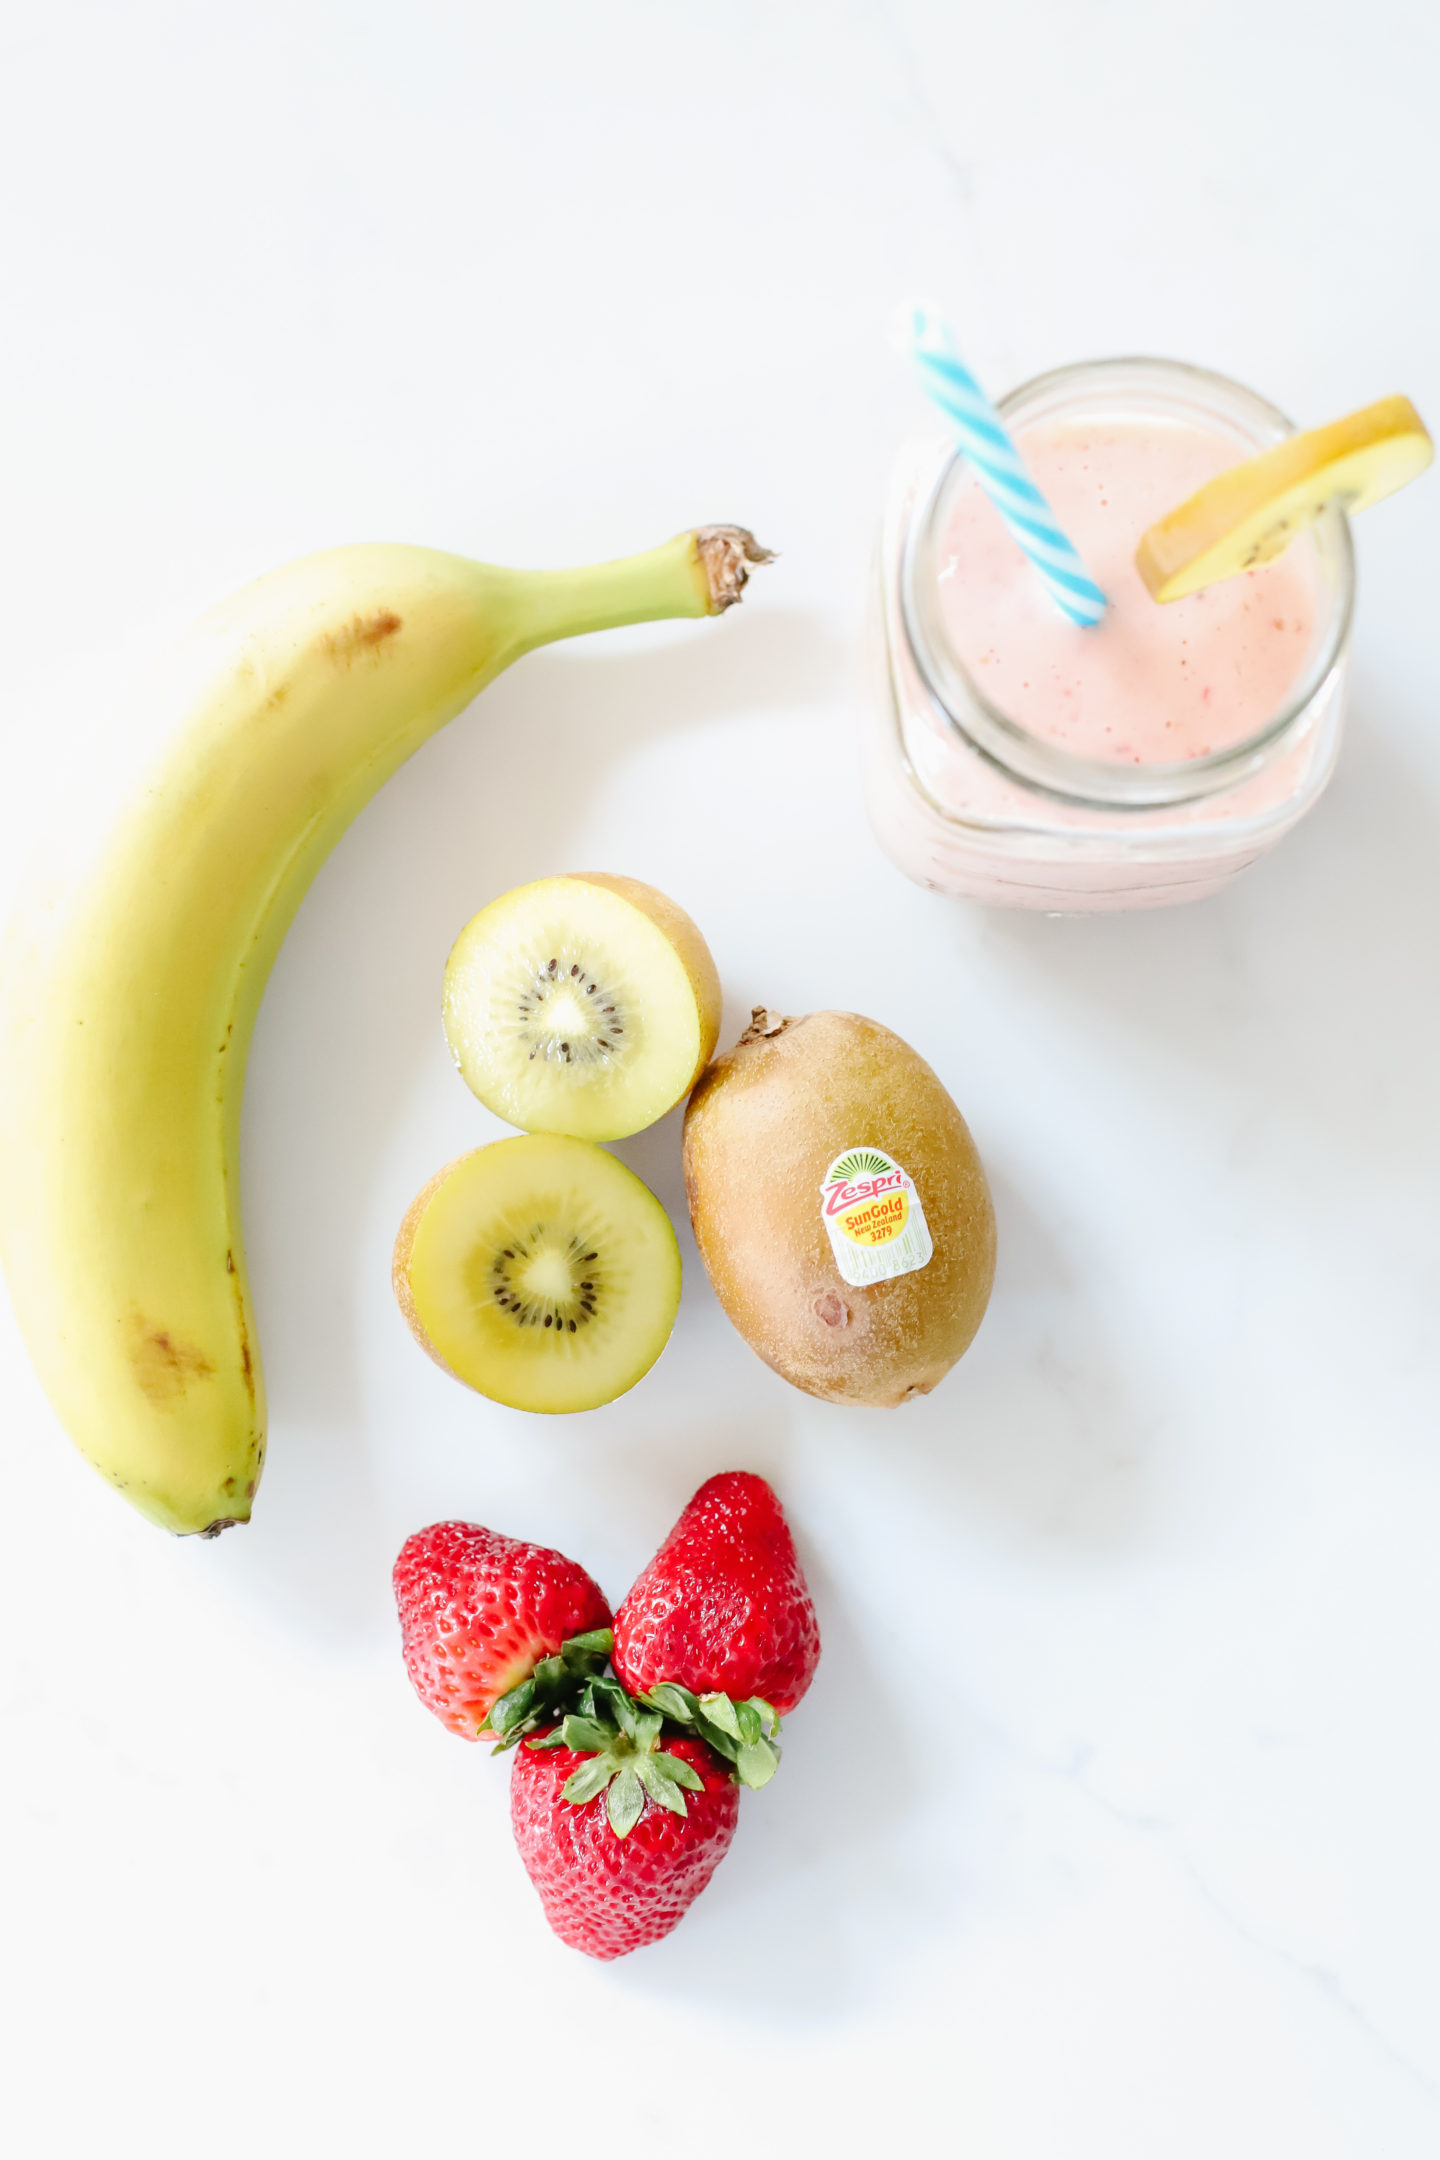 The perfect yellow kiwi strawberry banana smoothie! Perfect for on the go and wandering into new adventures. #WanderWithZespri #ZespriSunGoldKiwifruit #Zespri #Ad